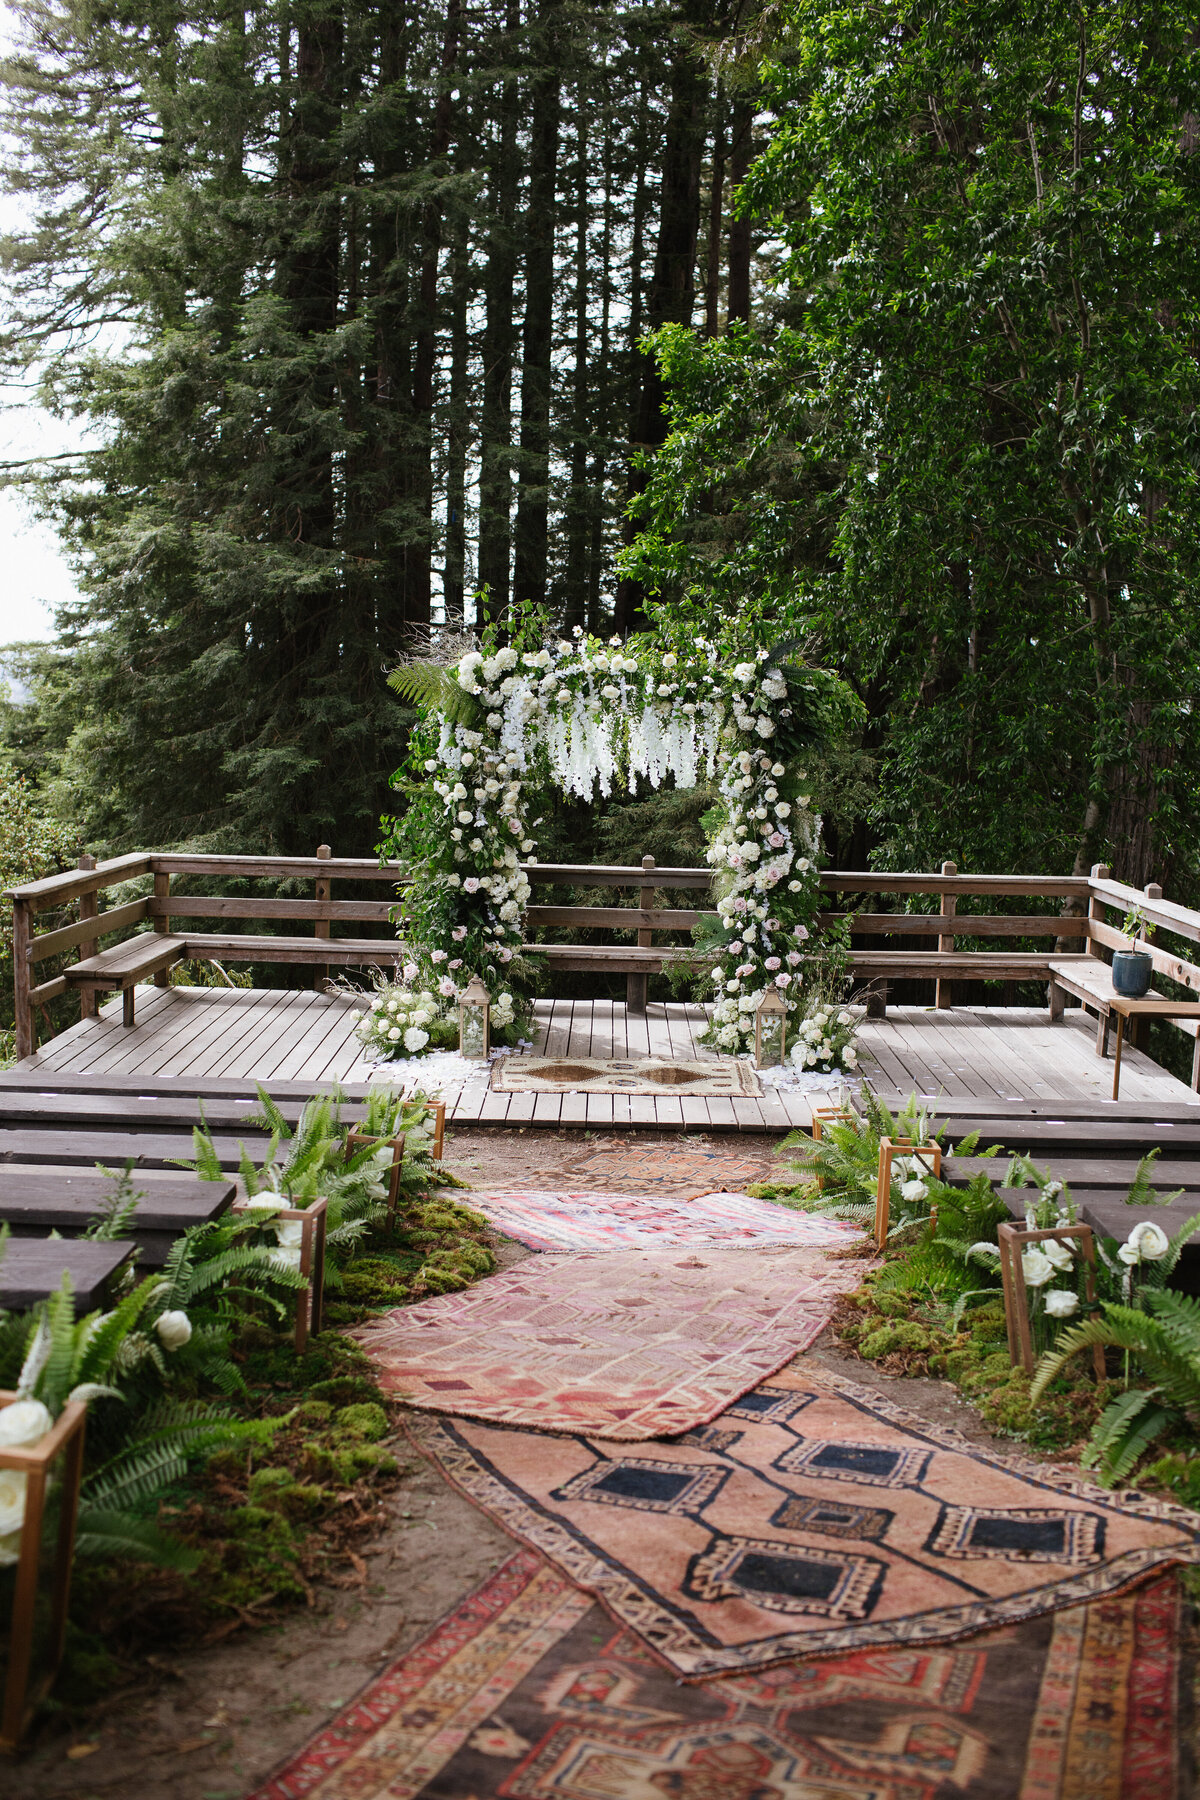 Ceremony with benches, rugs, and hanging flowers on an arch in the redwoods